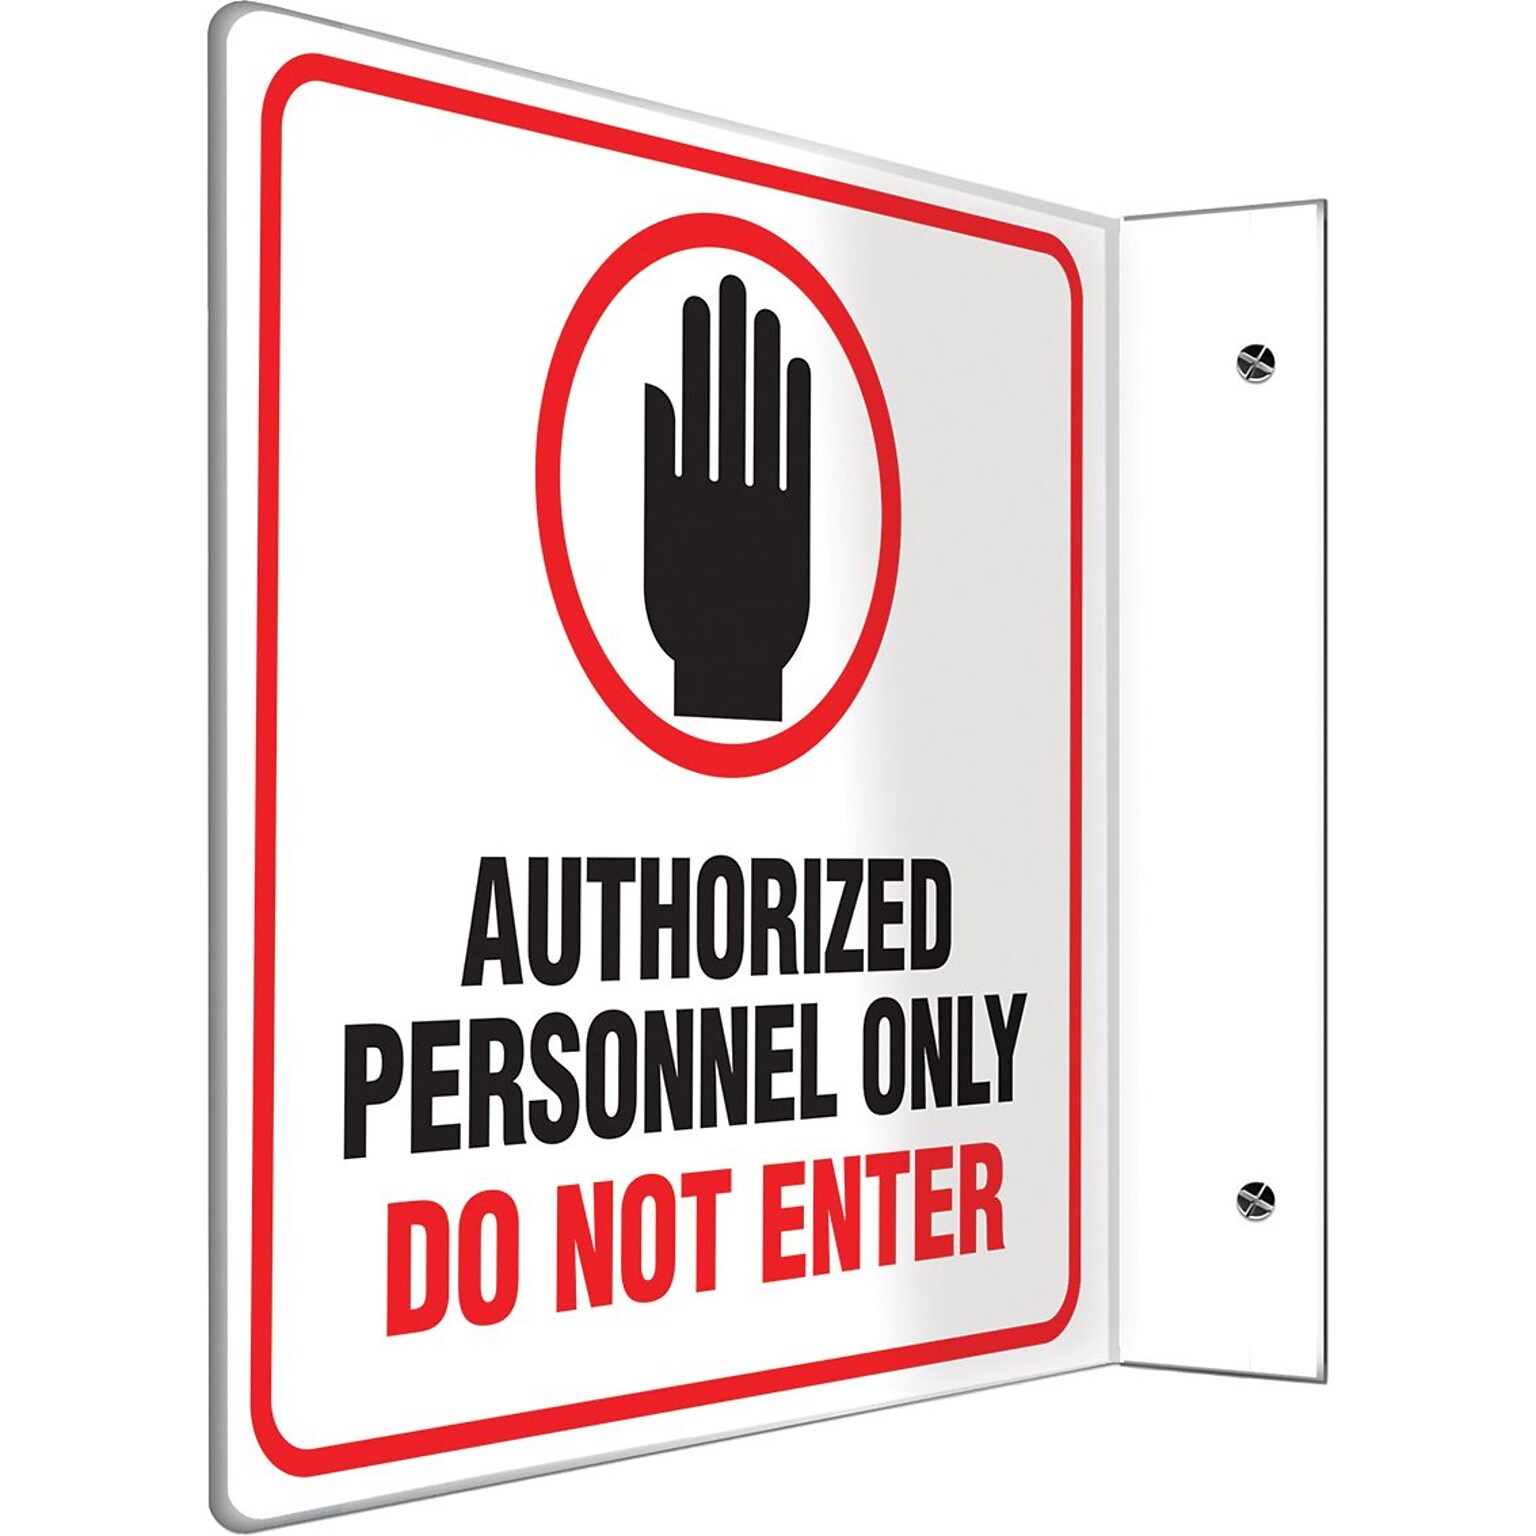 Accuform Authorized Personnel Only Do Not Enter Projection Sign, Black/Red/White, 8H x 8W (PSP231)